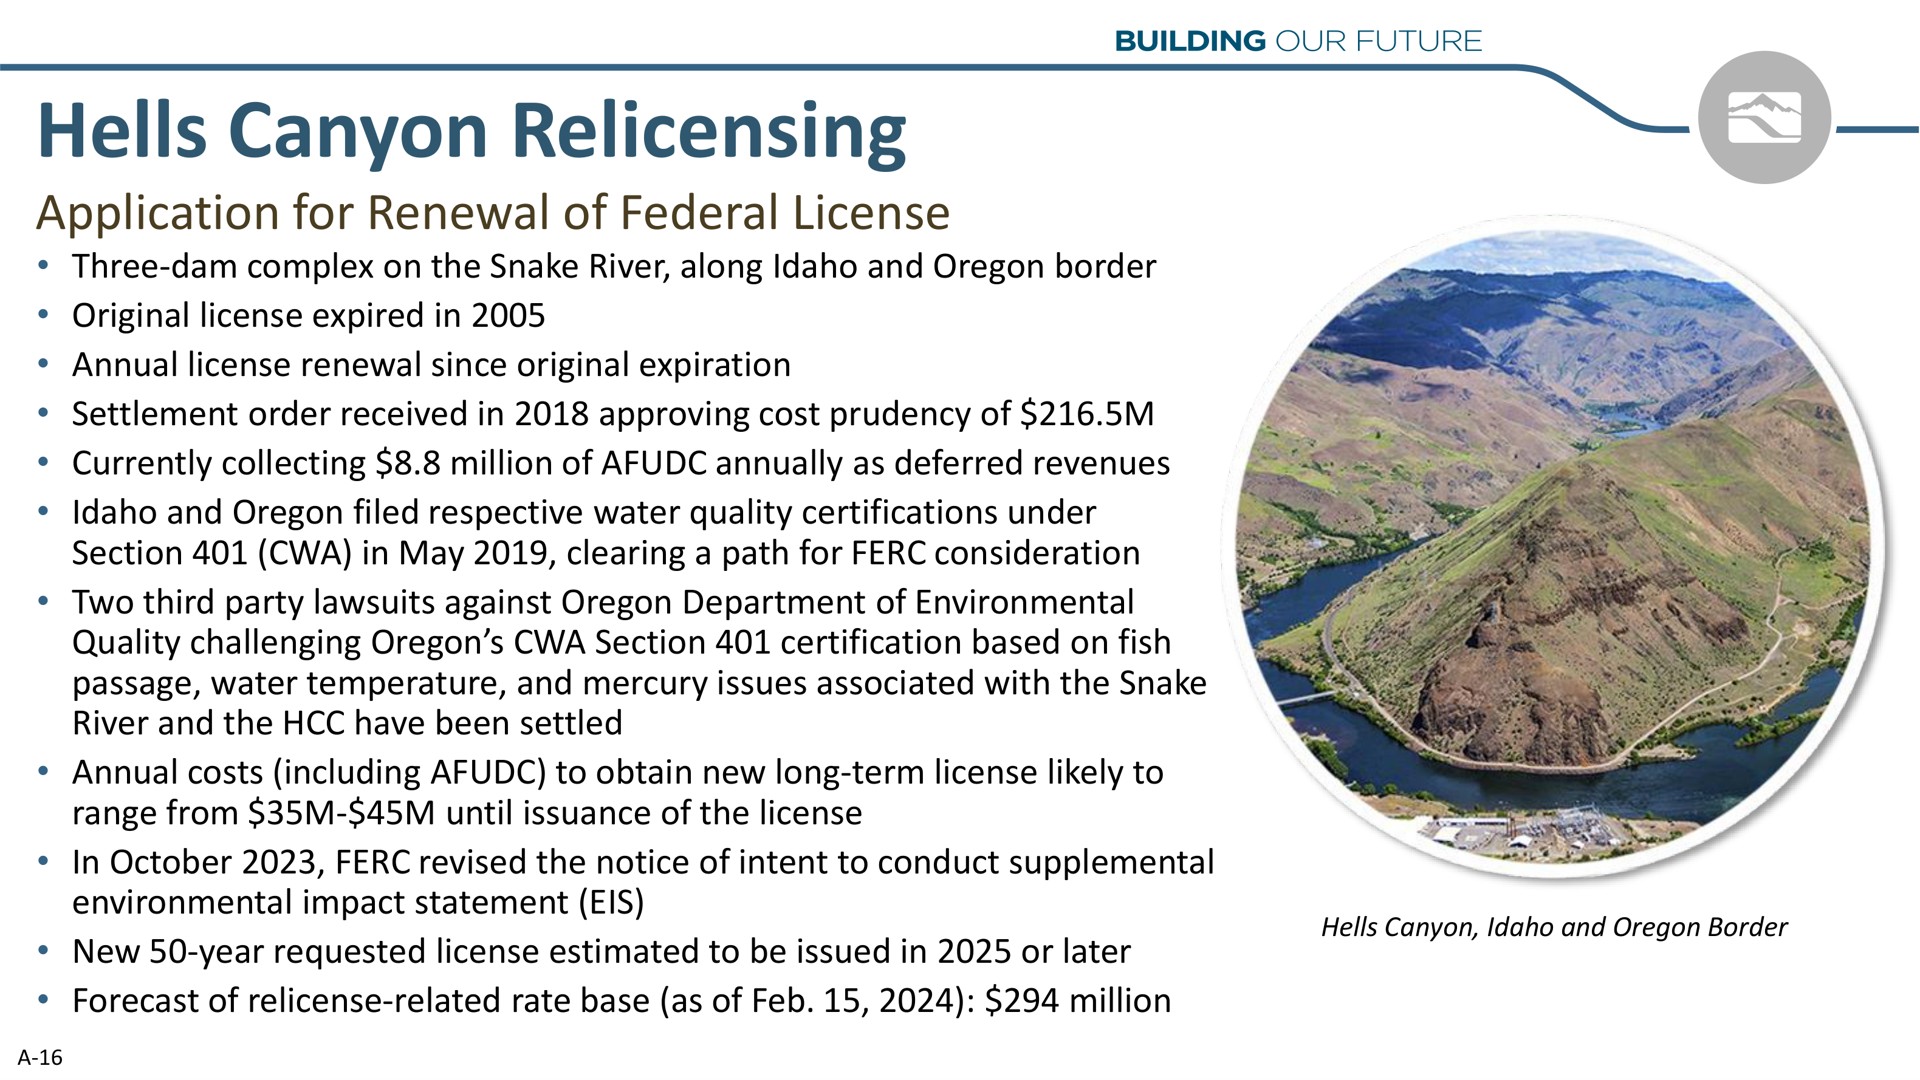 hells canyon application for renewal of federal license | Idacorp